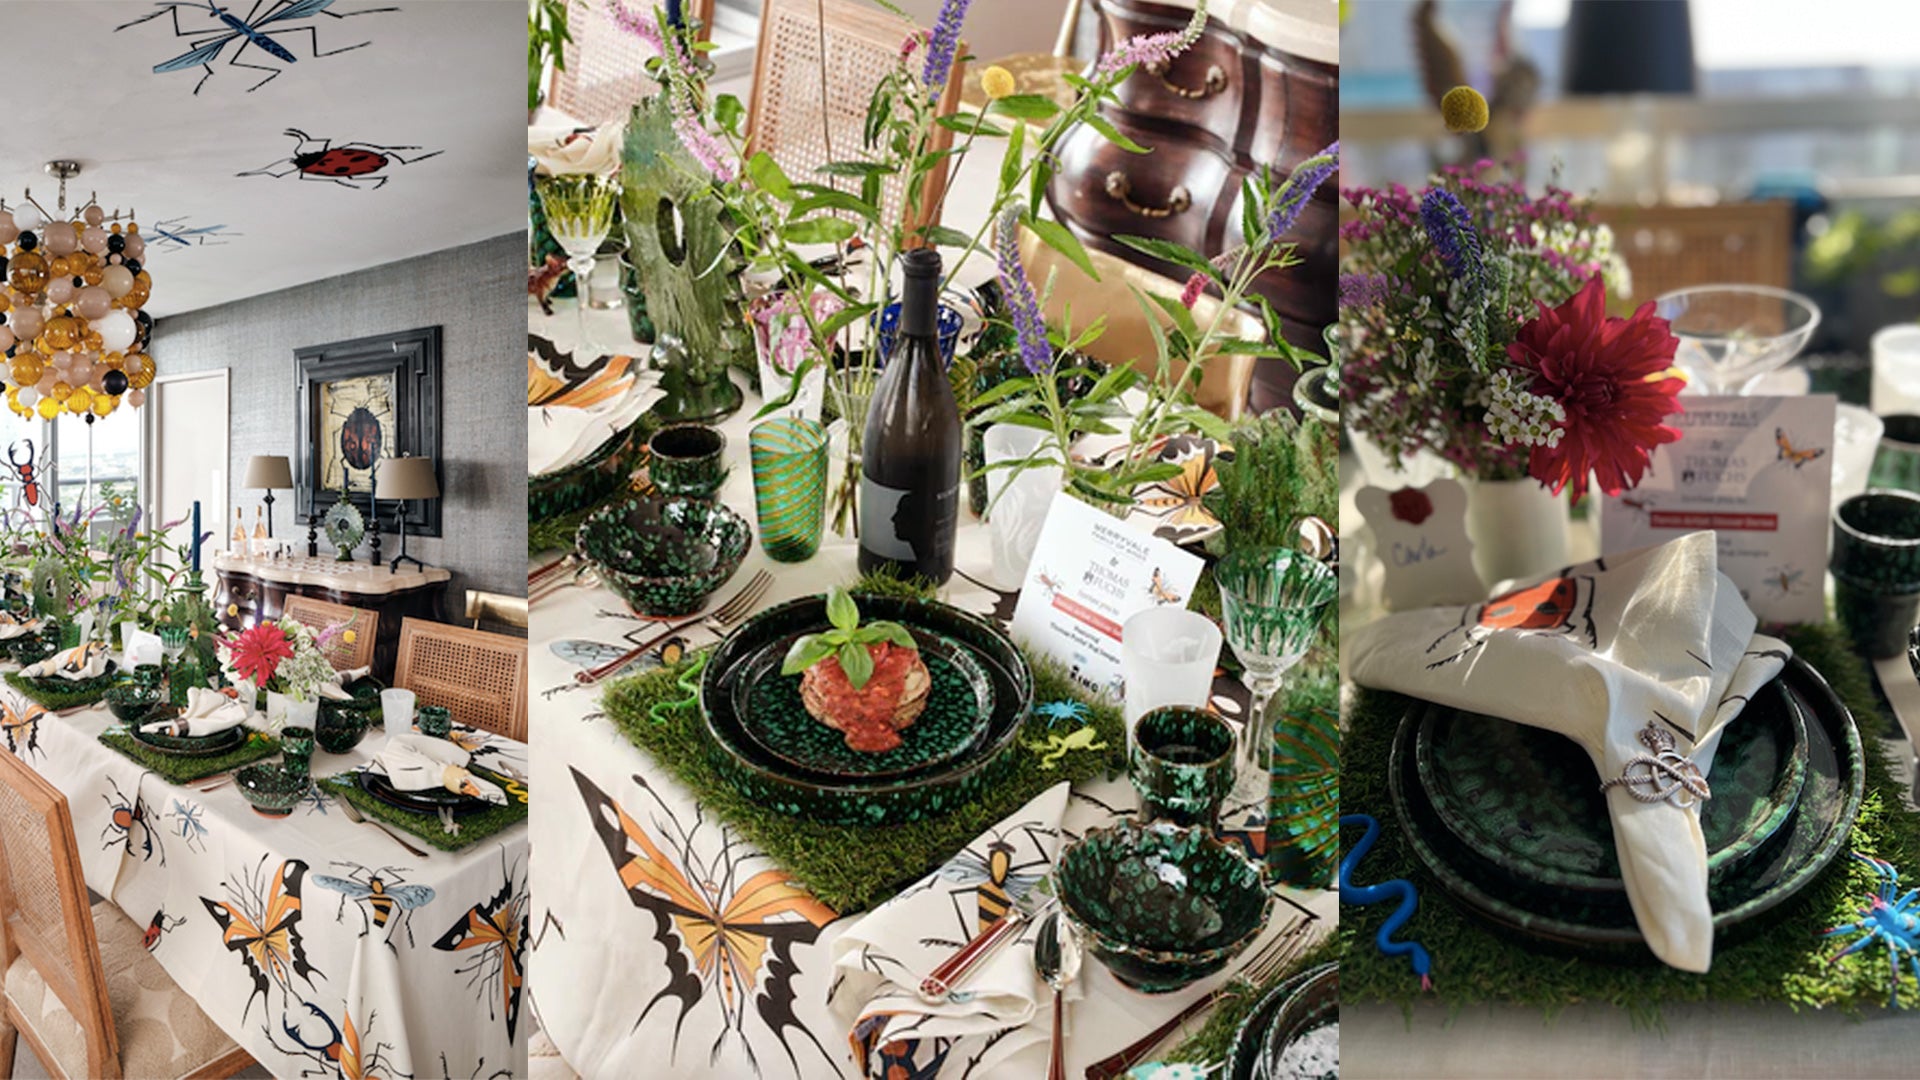 "HAUTE HALLOWEEN" - 7 STEPS ON HOW TO SET A TABLE-SCAPE WITH AMAZON